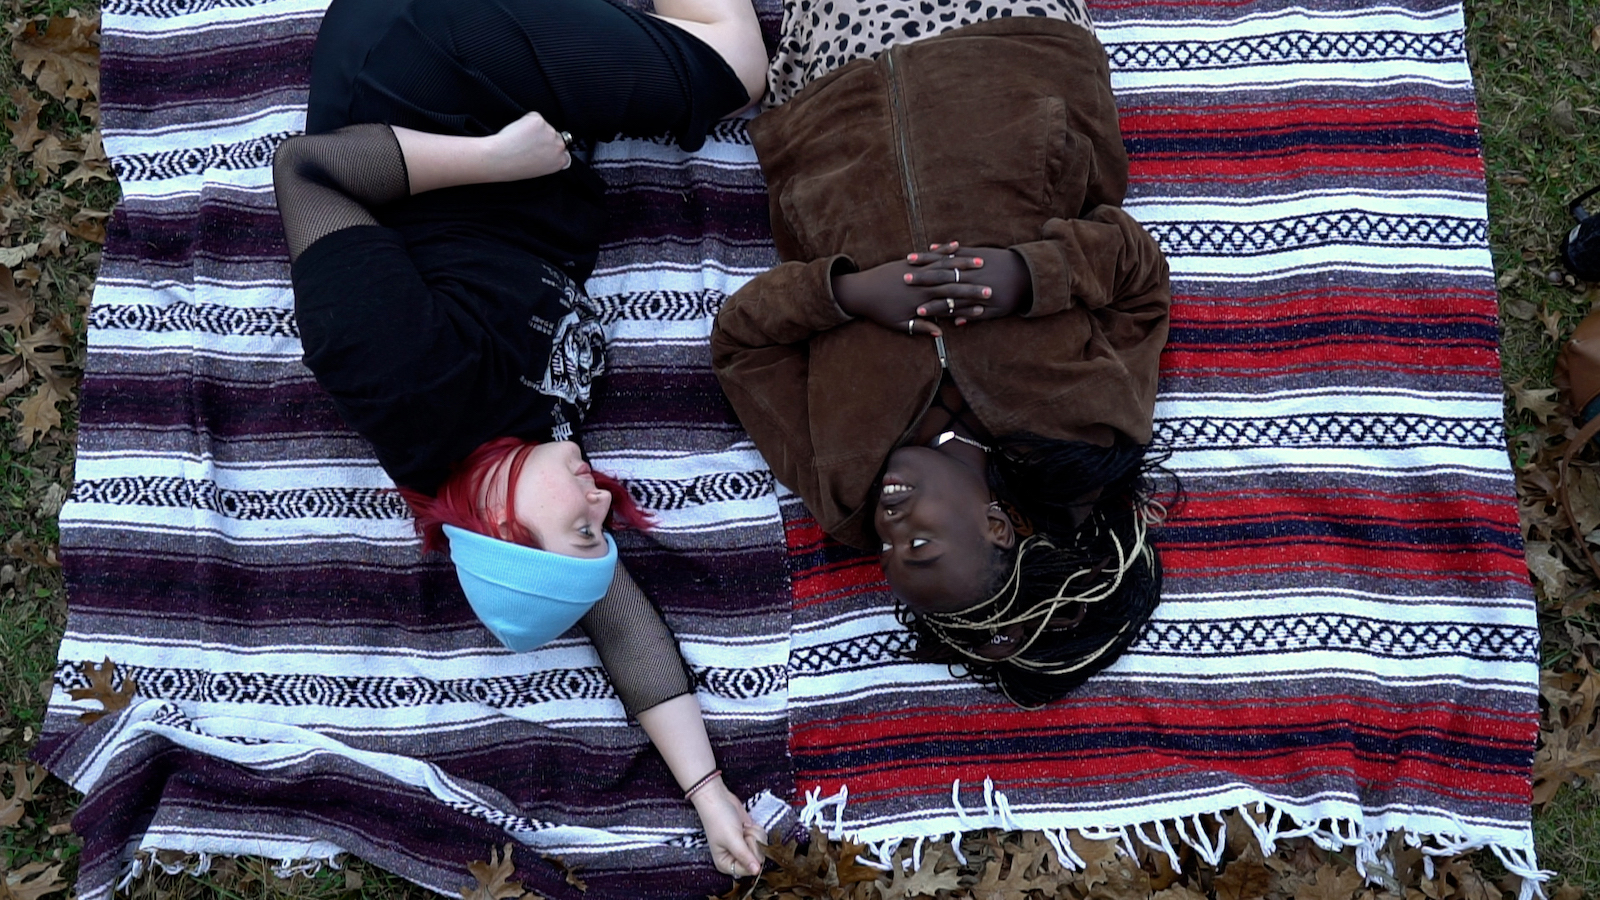 Two young women lie on a blanket outside talking to each other, the image is upside down